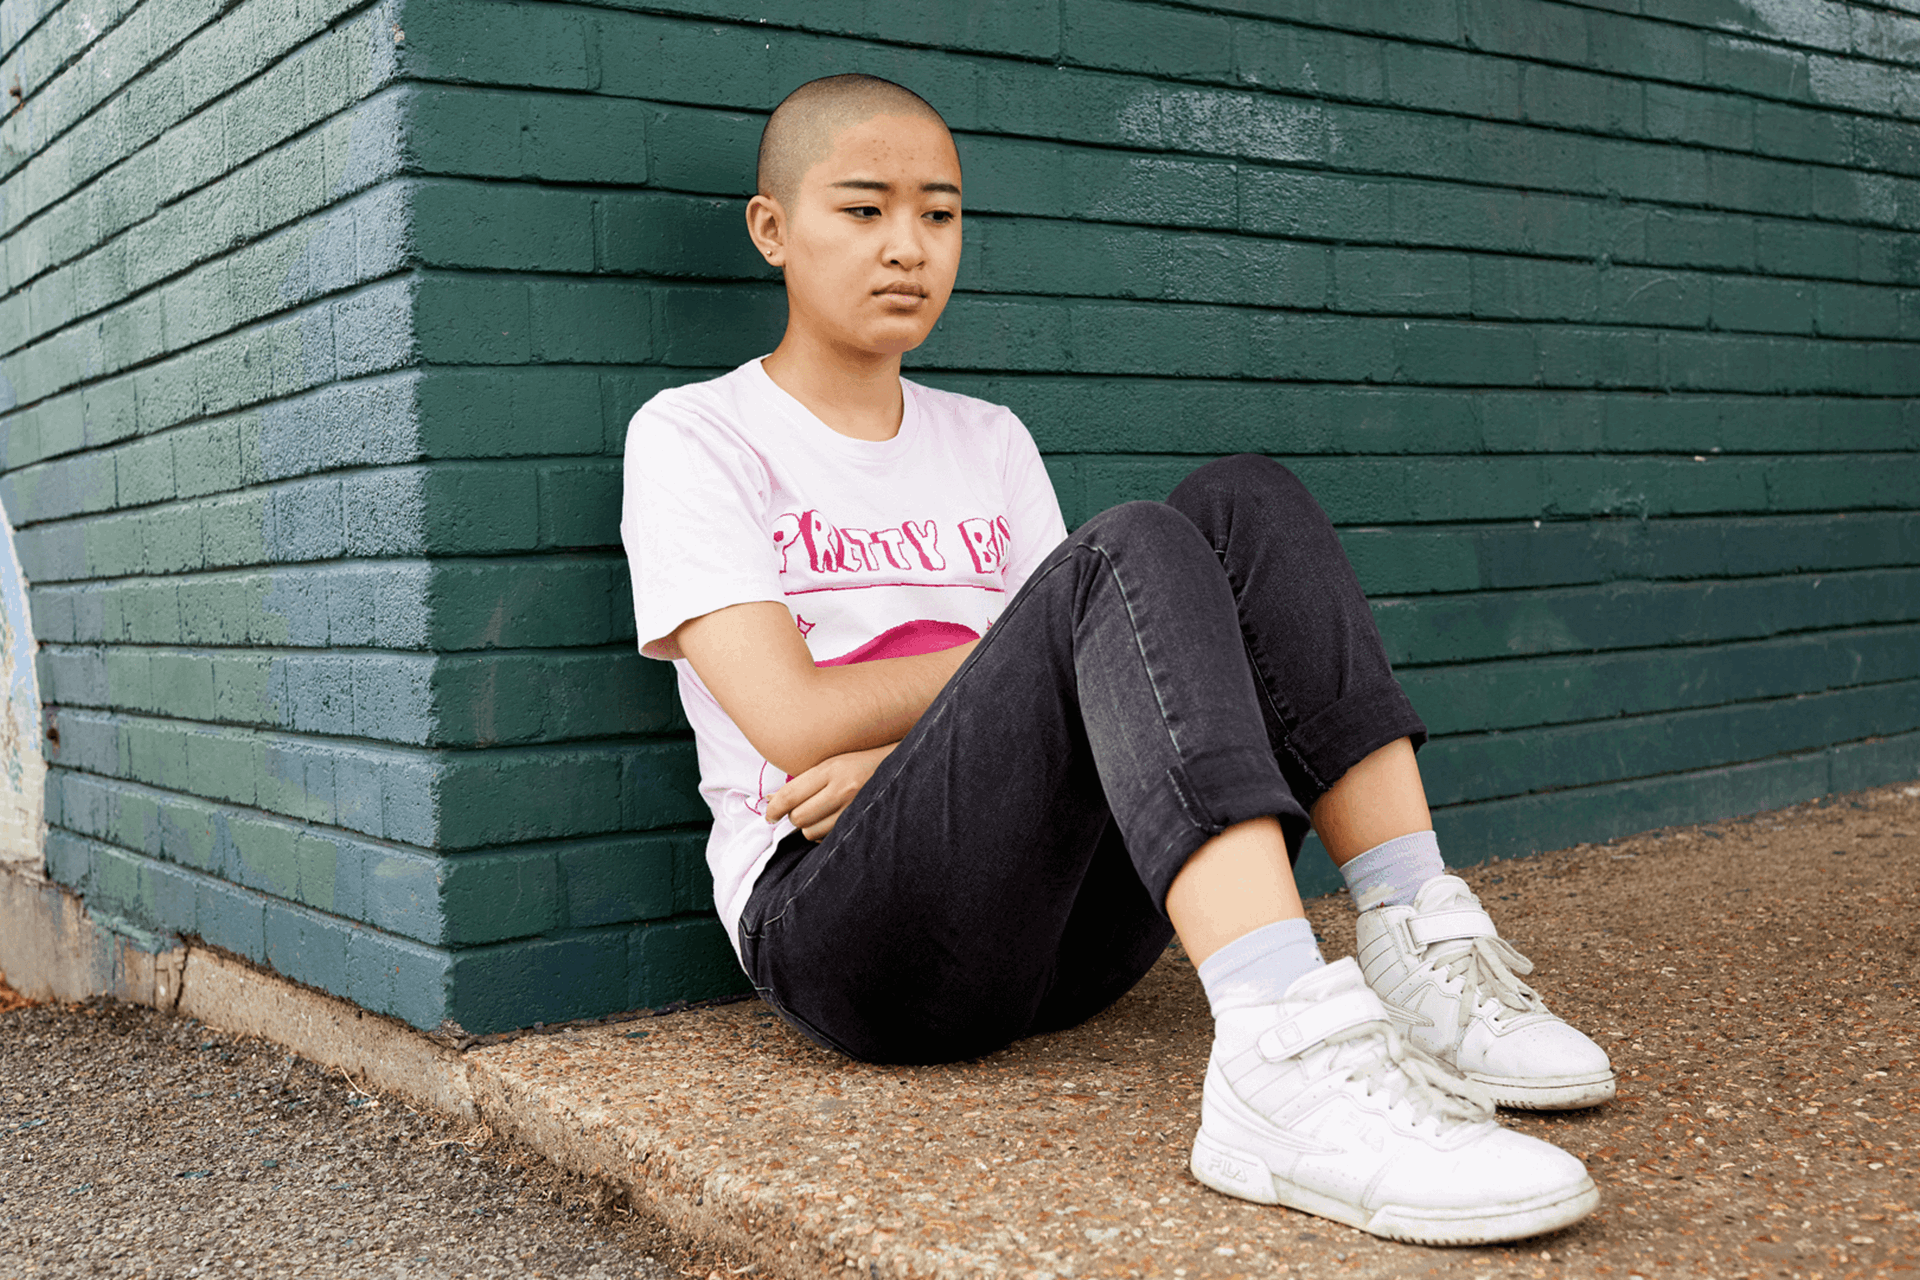 A girl with a shaved head wearing a t-shirt and black jeans. She is sitting on the ground and leaning against a green brick wall.